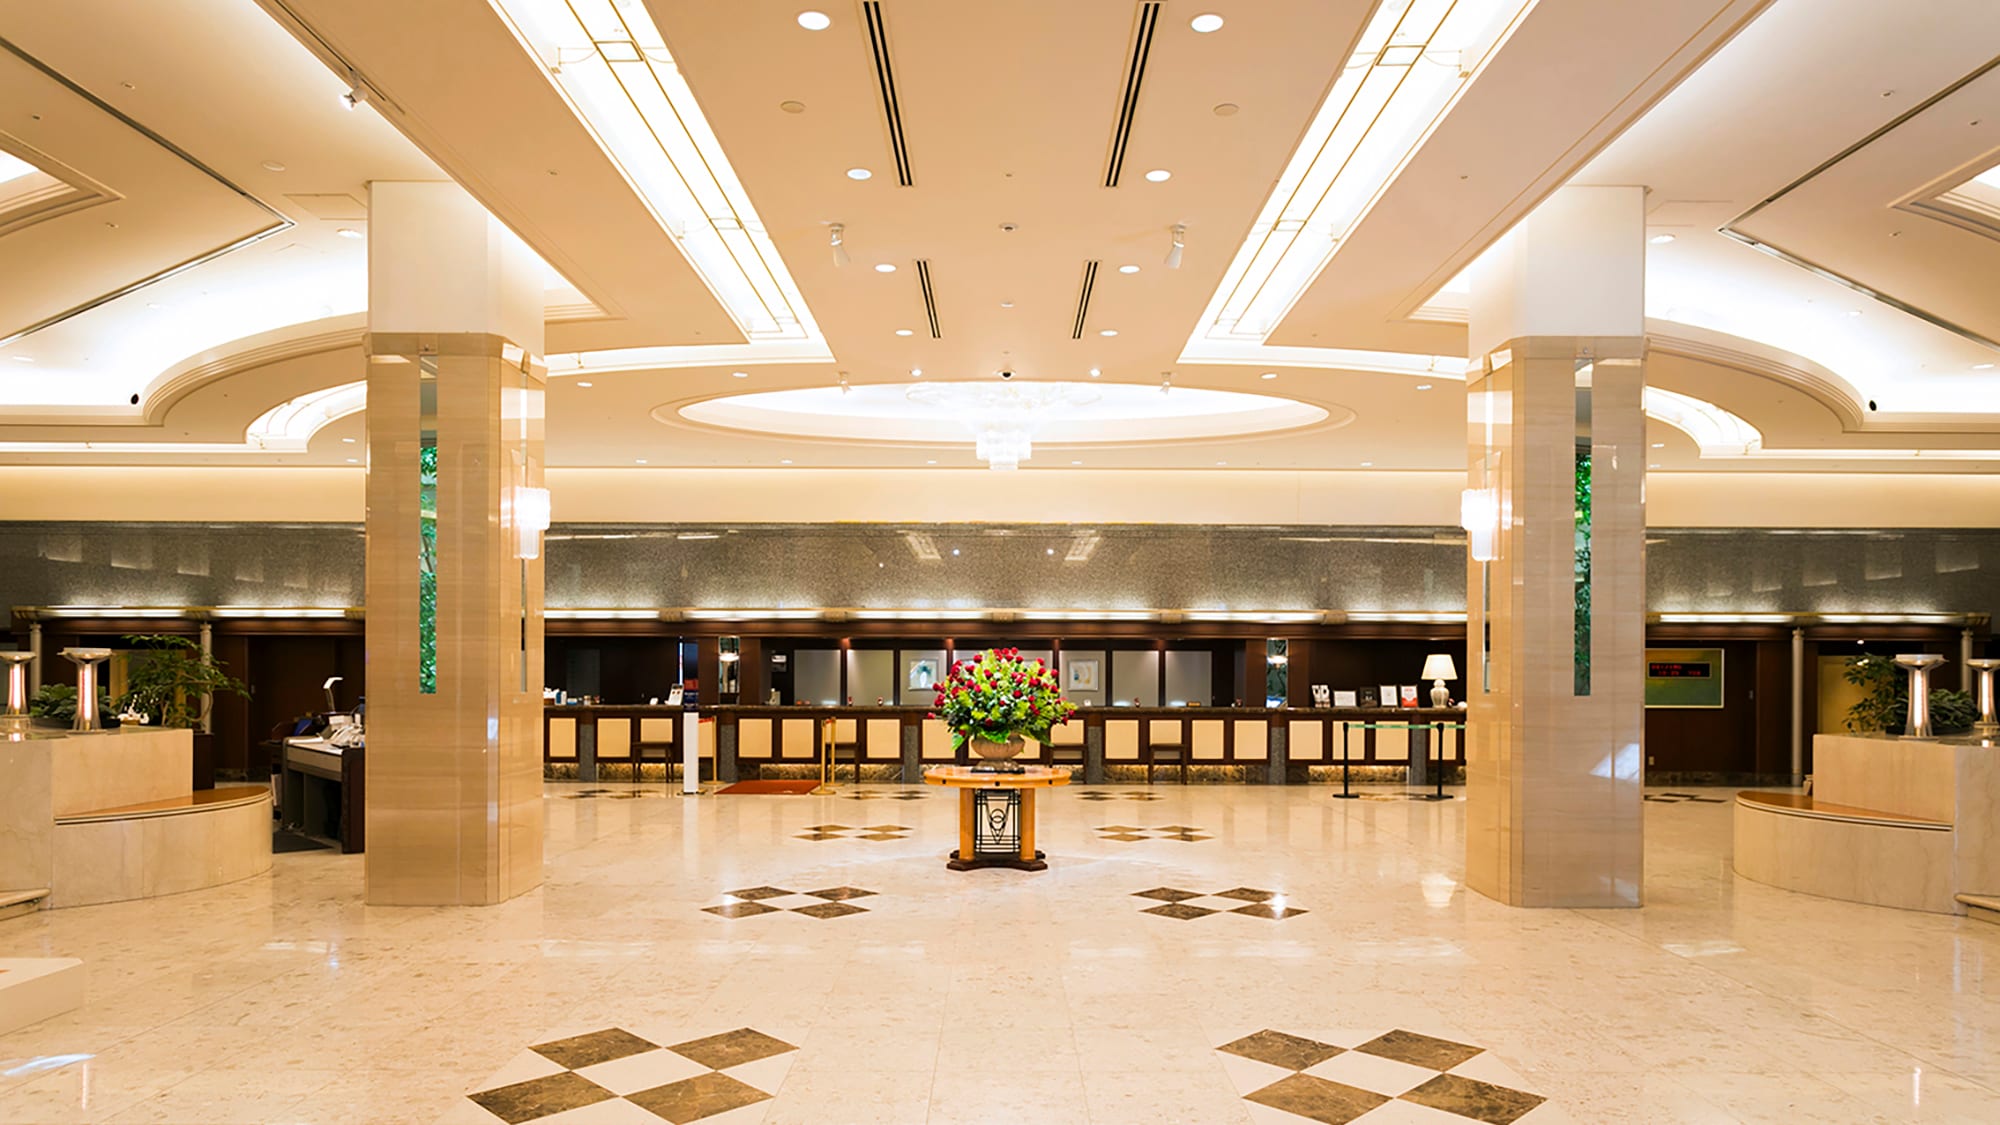 We will welcome you in a bright and spacious lobby.